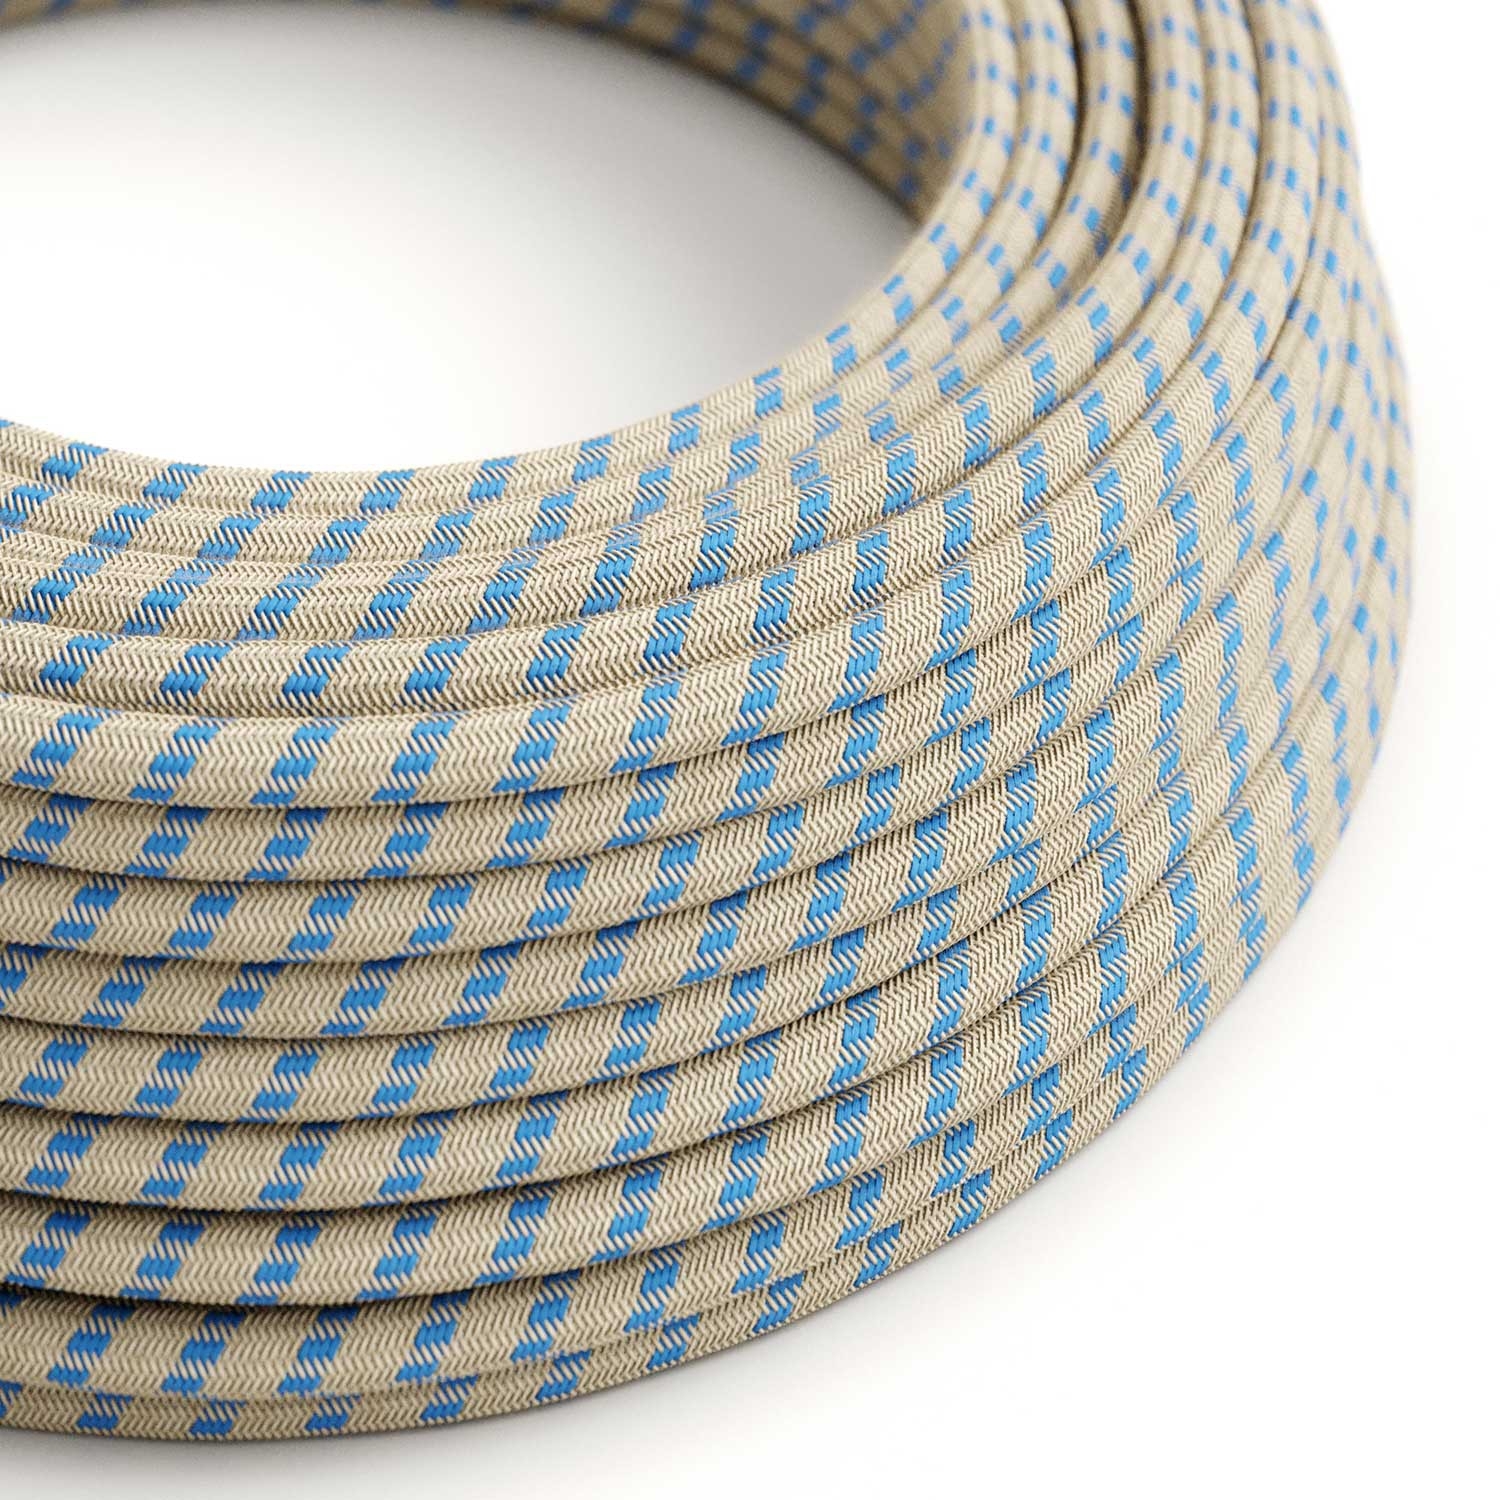 RD55 Steward Blue Stripes Round Cotton & Linen Electrical Fabric Cloth Cord Cable